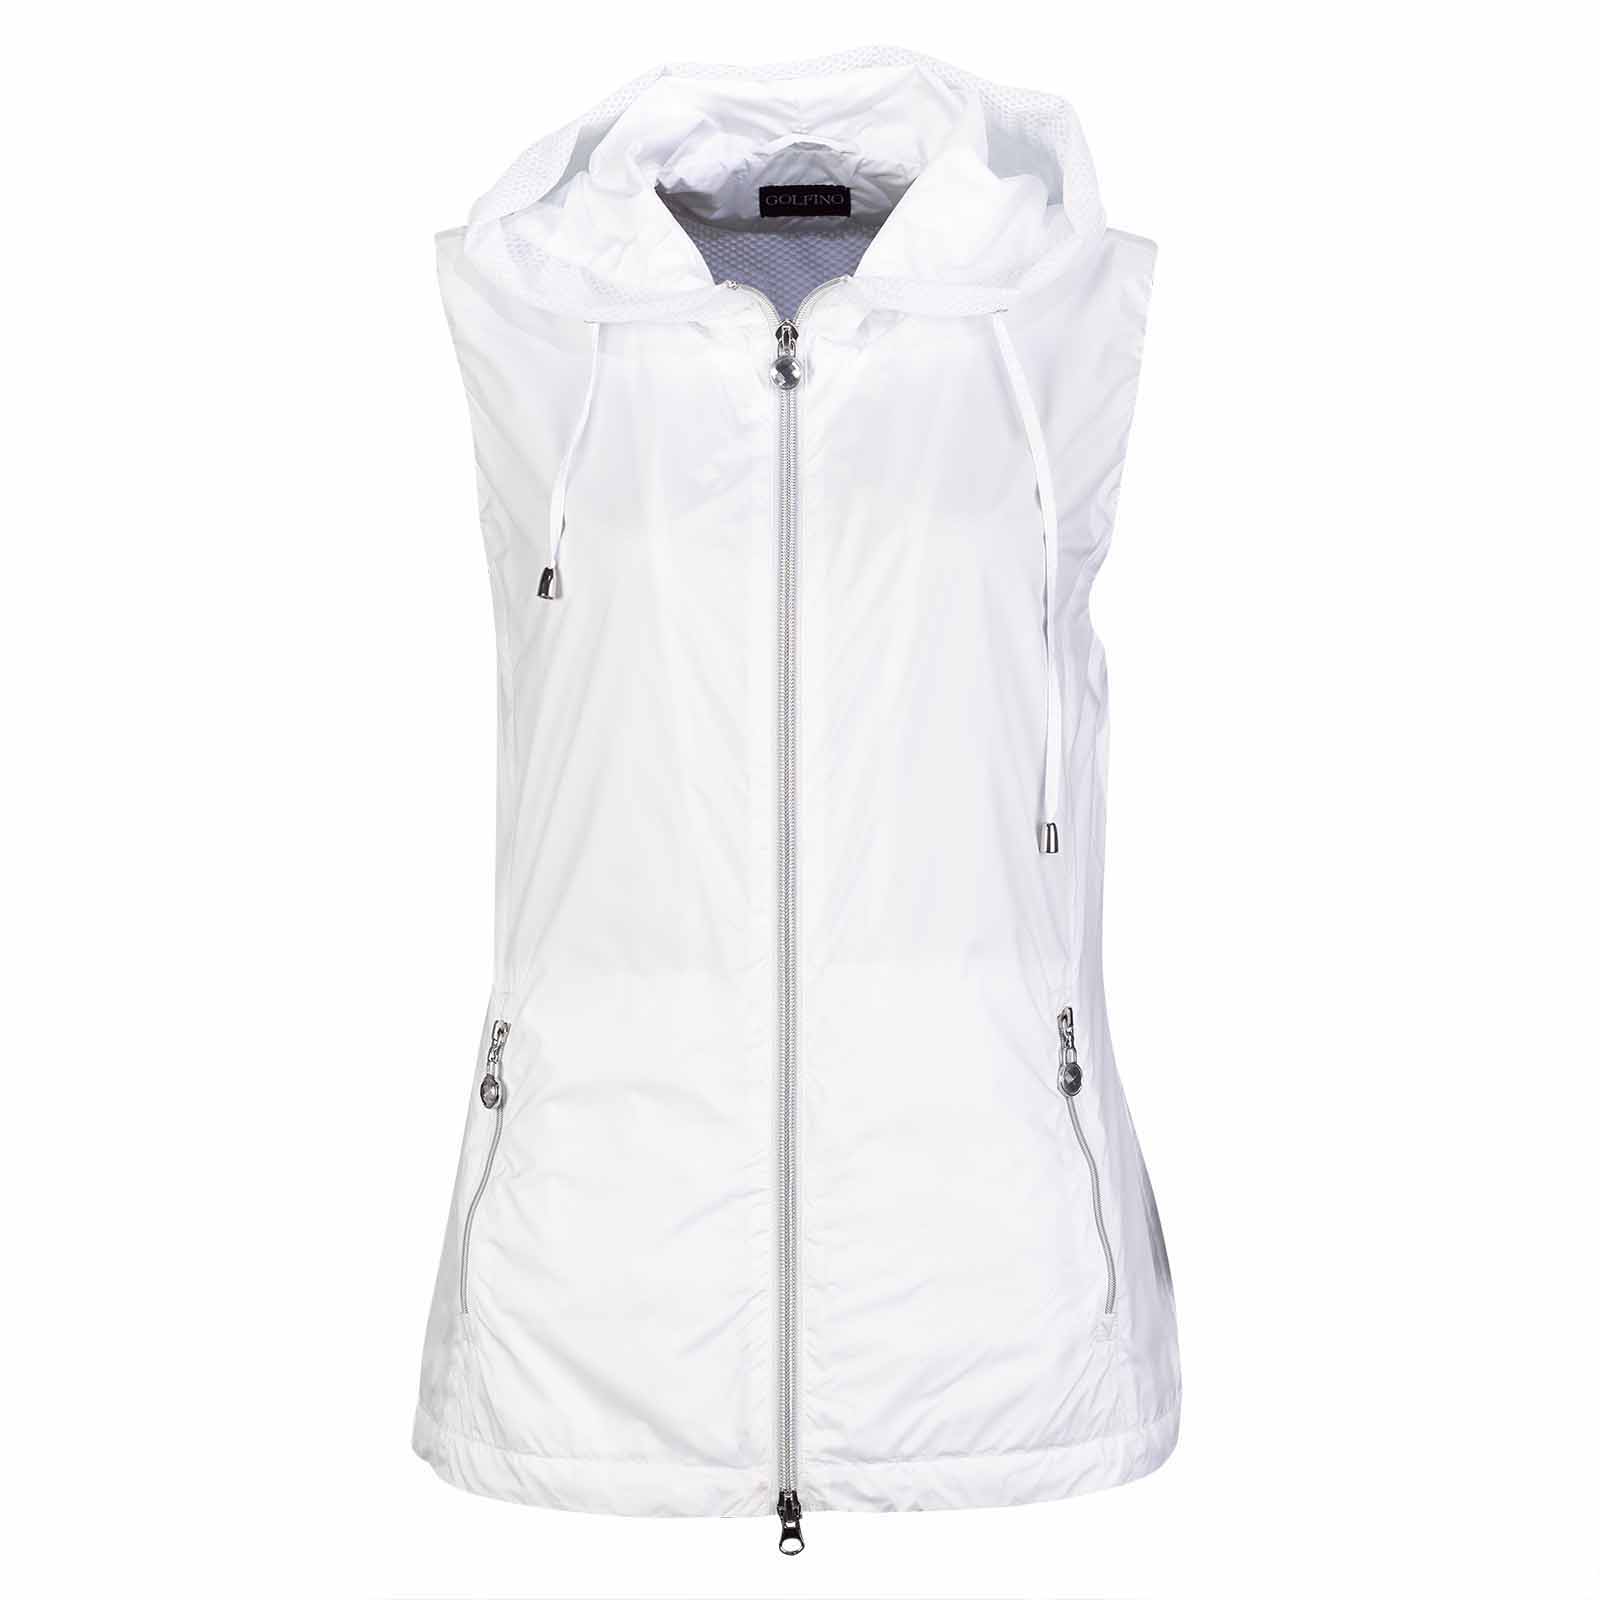 Ladies' golf gilet with hood and wind protection, made from very lightweight microfibre